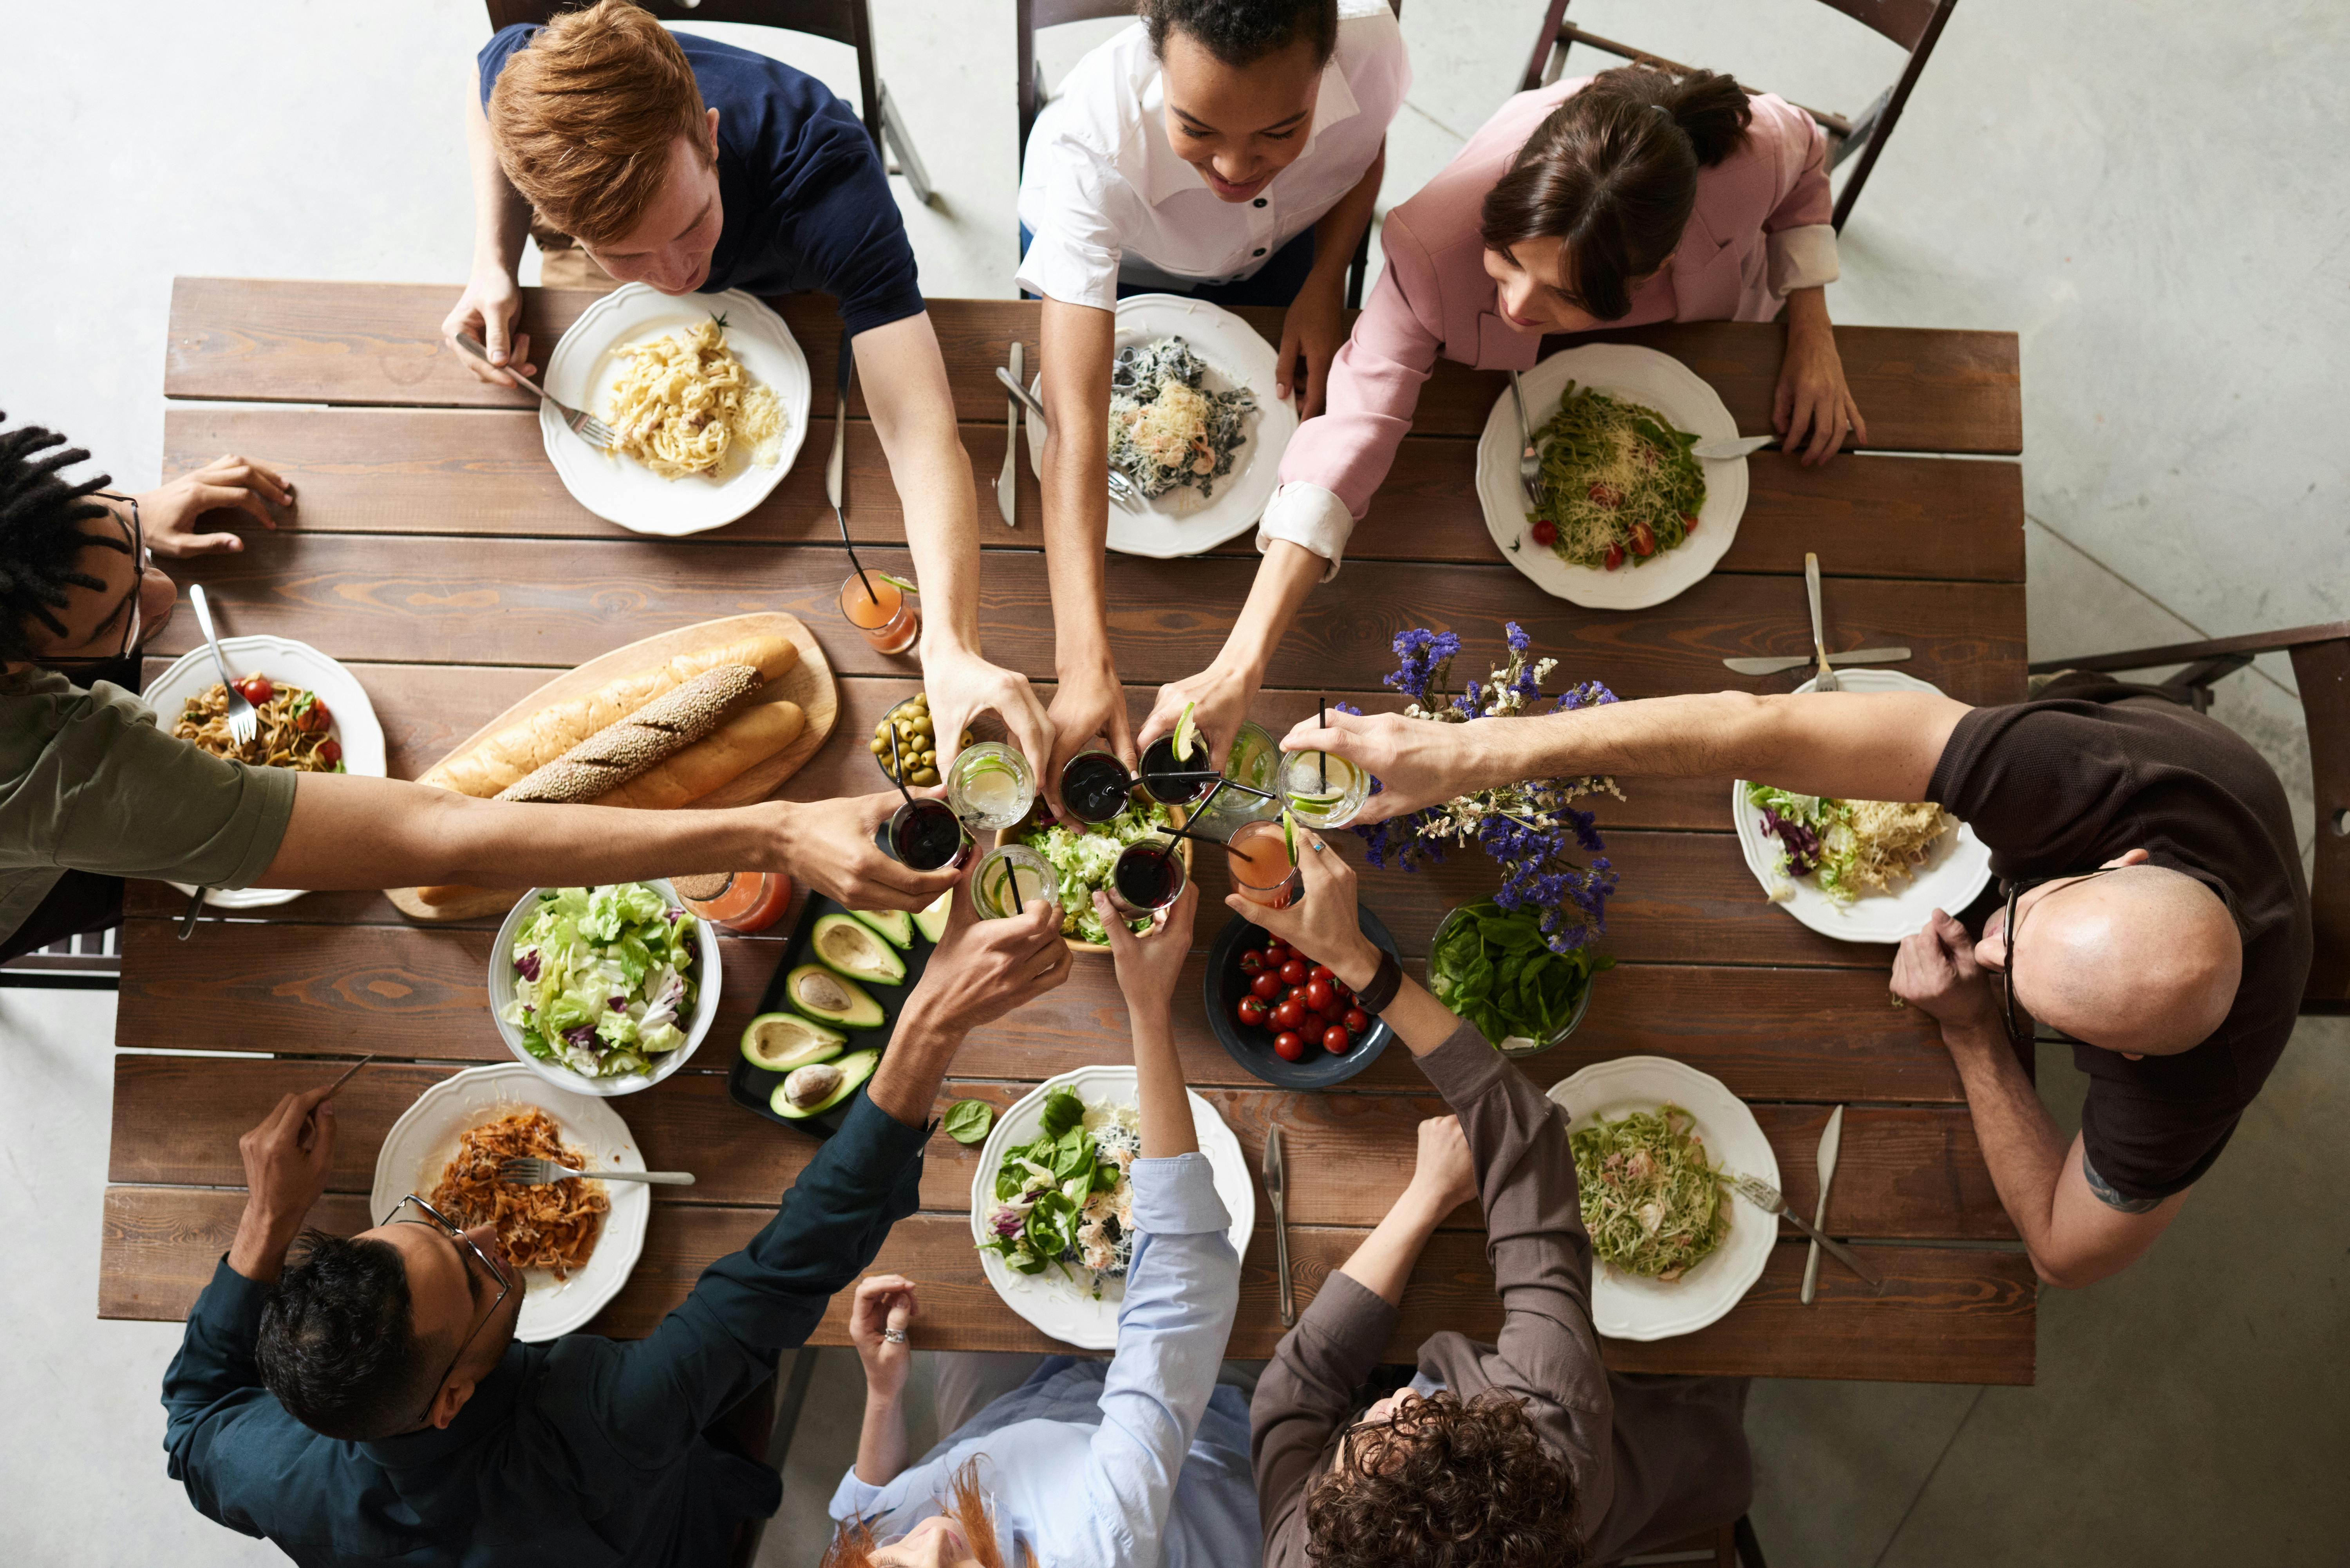 A dinner party | Source: Pexels